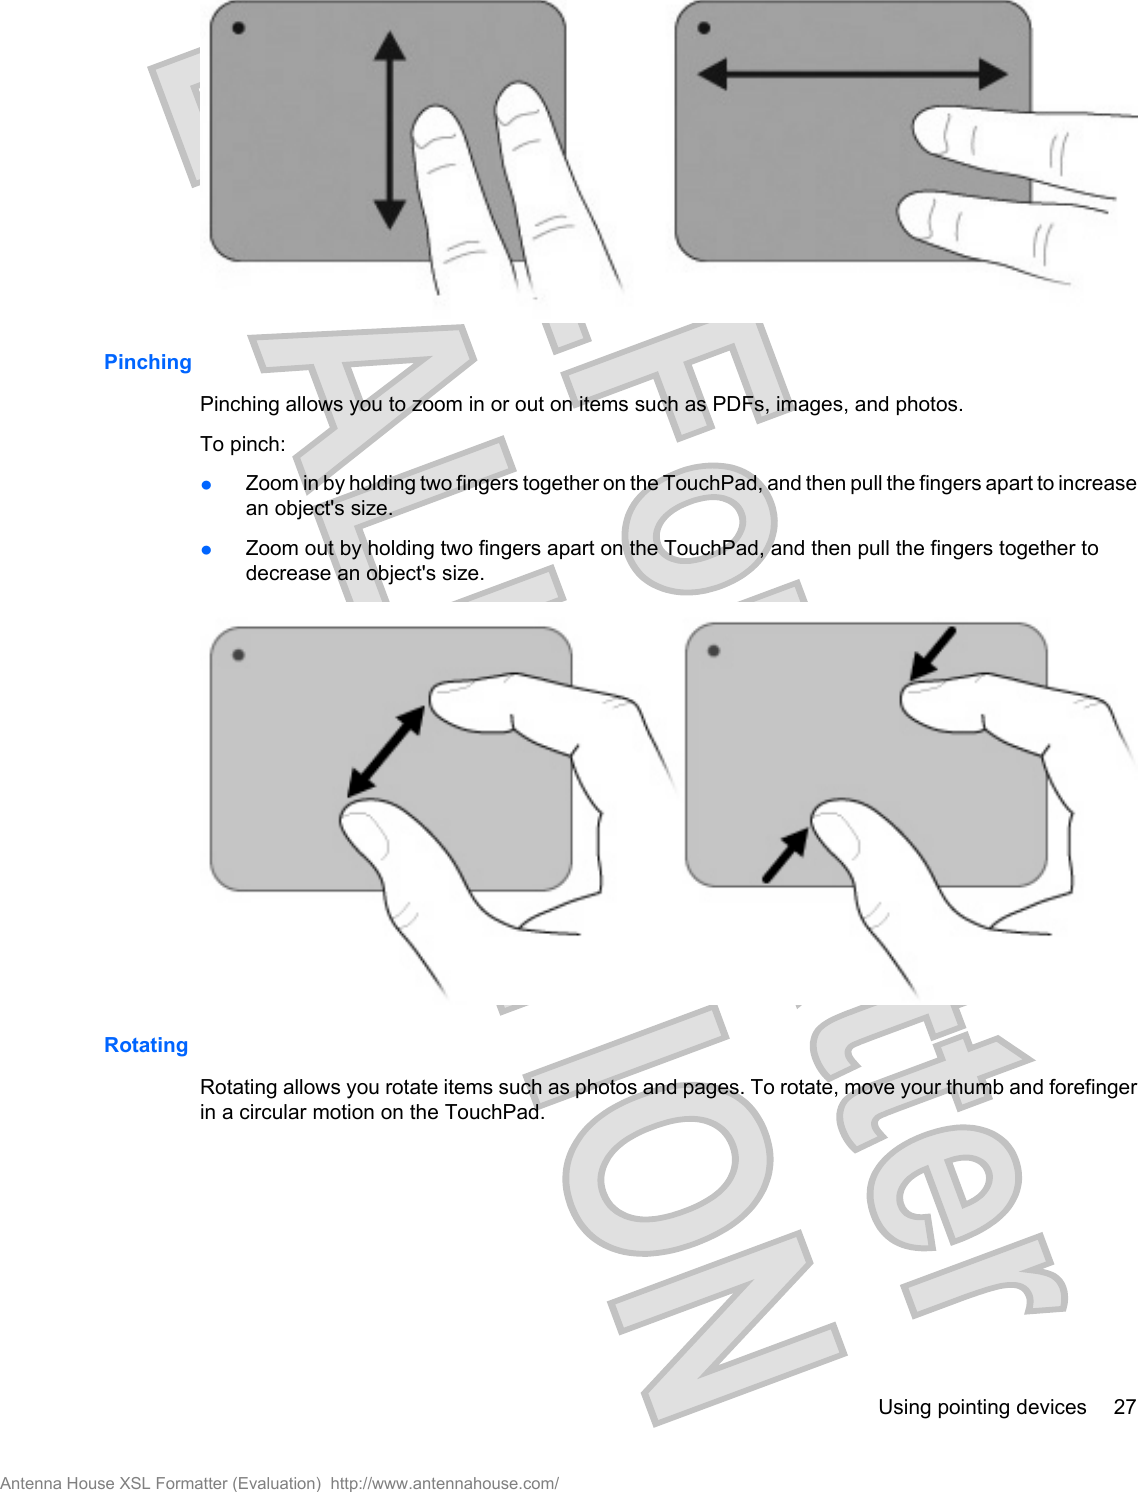 PinchingPinching allows you to zoom in or out on items such as PDFs, images, and photos.To pinch:łZoom in by holding two fingers together on the TouchPad, and then pull the fingers apart to increasean object&apos;s size.łZoom out by holding two fingers apart on the TouchPad, and then pull the fingers together todecrease an object&apos;s size.RotatingRotating allows you rotate items such as photos and pages. To rotate, move your thumb and forefingerin a circular motion on the TouchPad.Using pointing devices 27Antenna House XSL Formatter (Evaluation)  http://www.antennahouse.com/